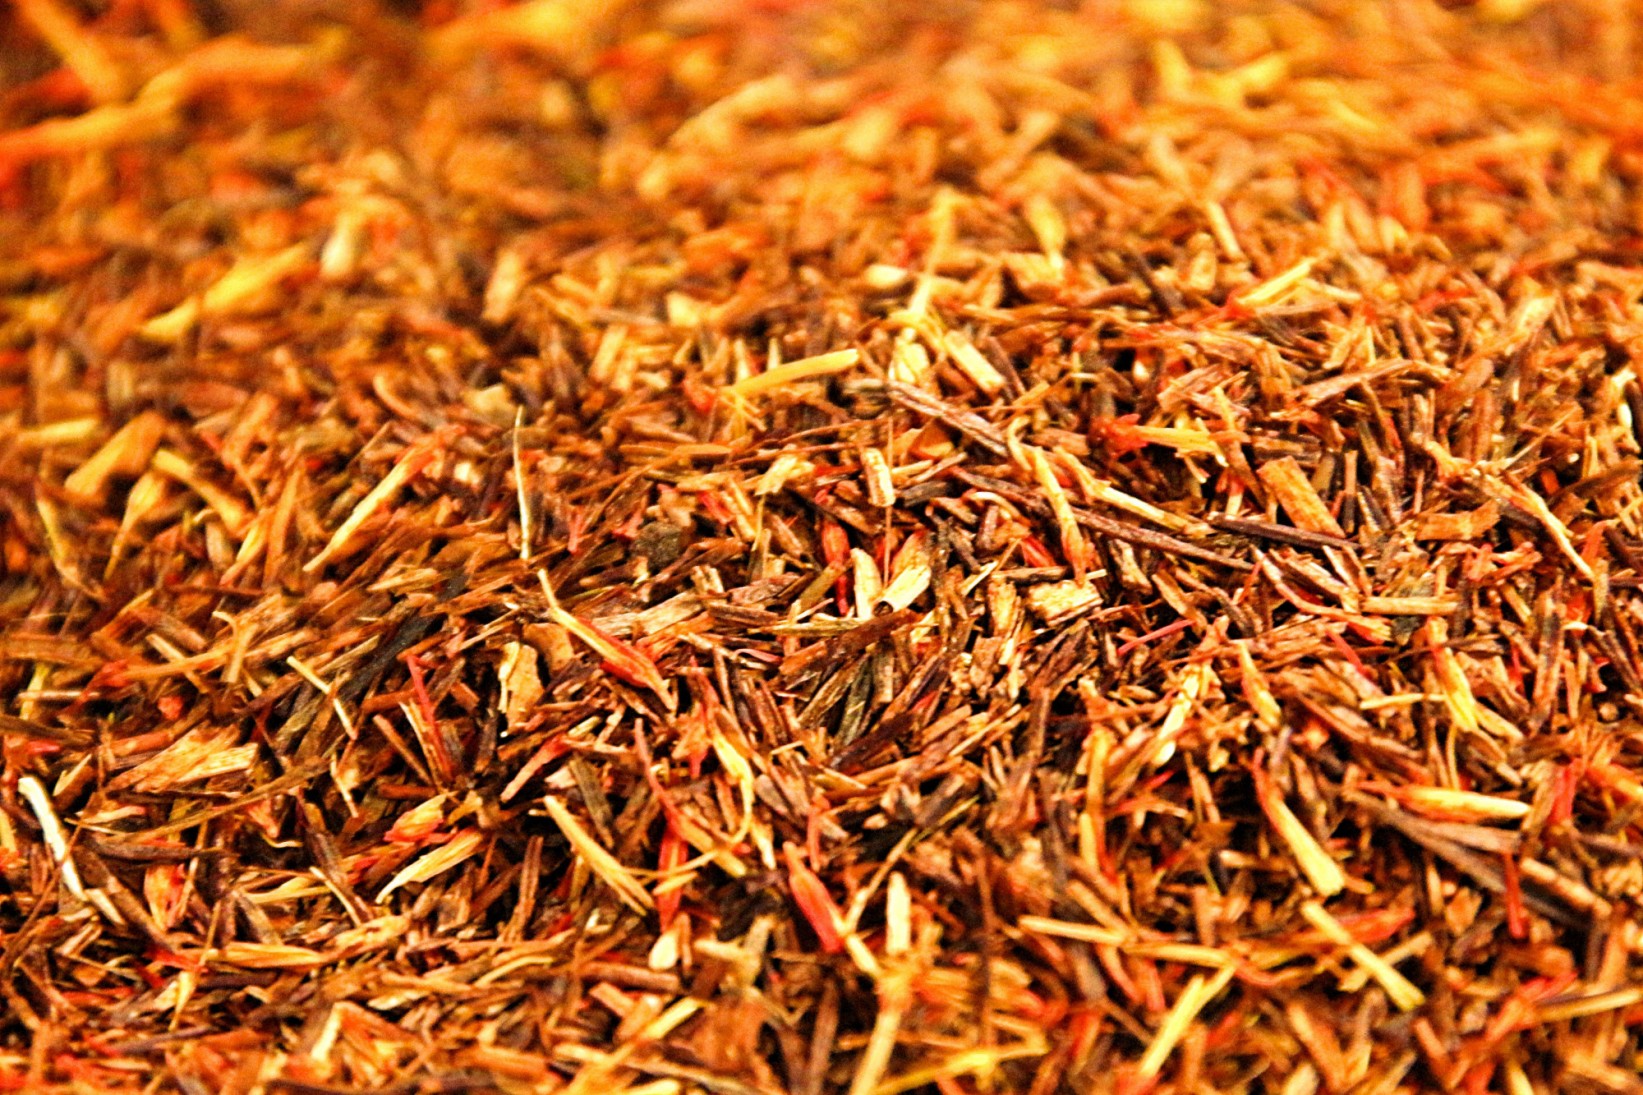 A lightning red rooibos with a natural aroma of blood orange and safflower petals.